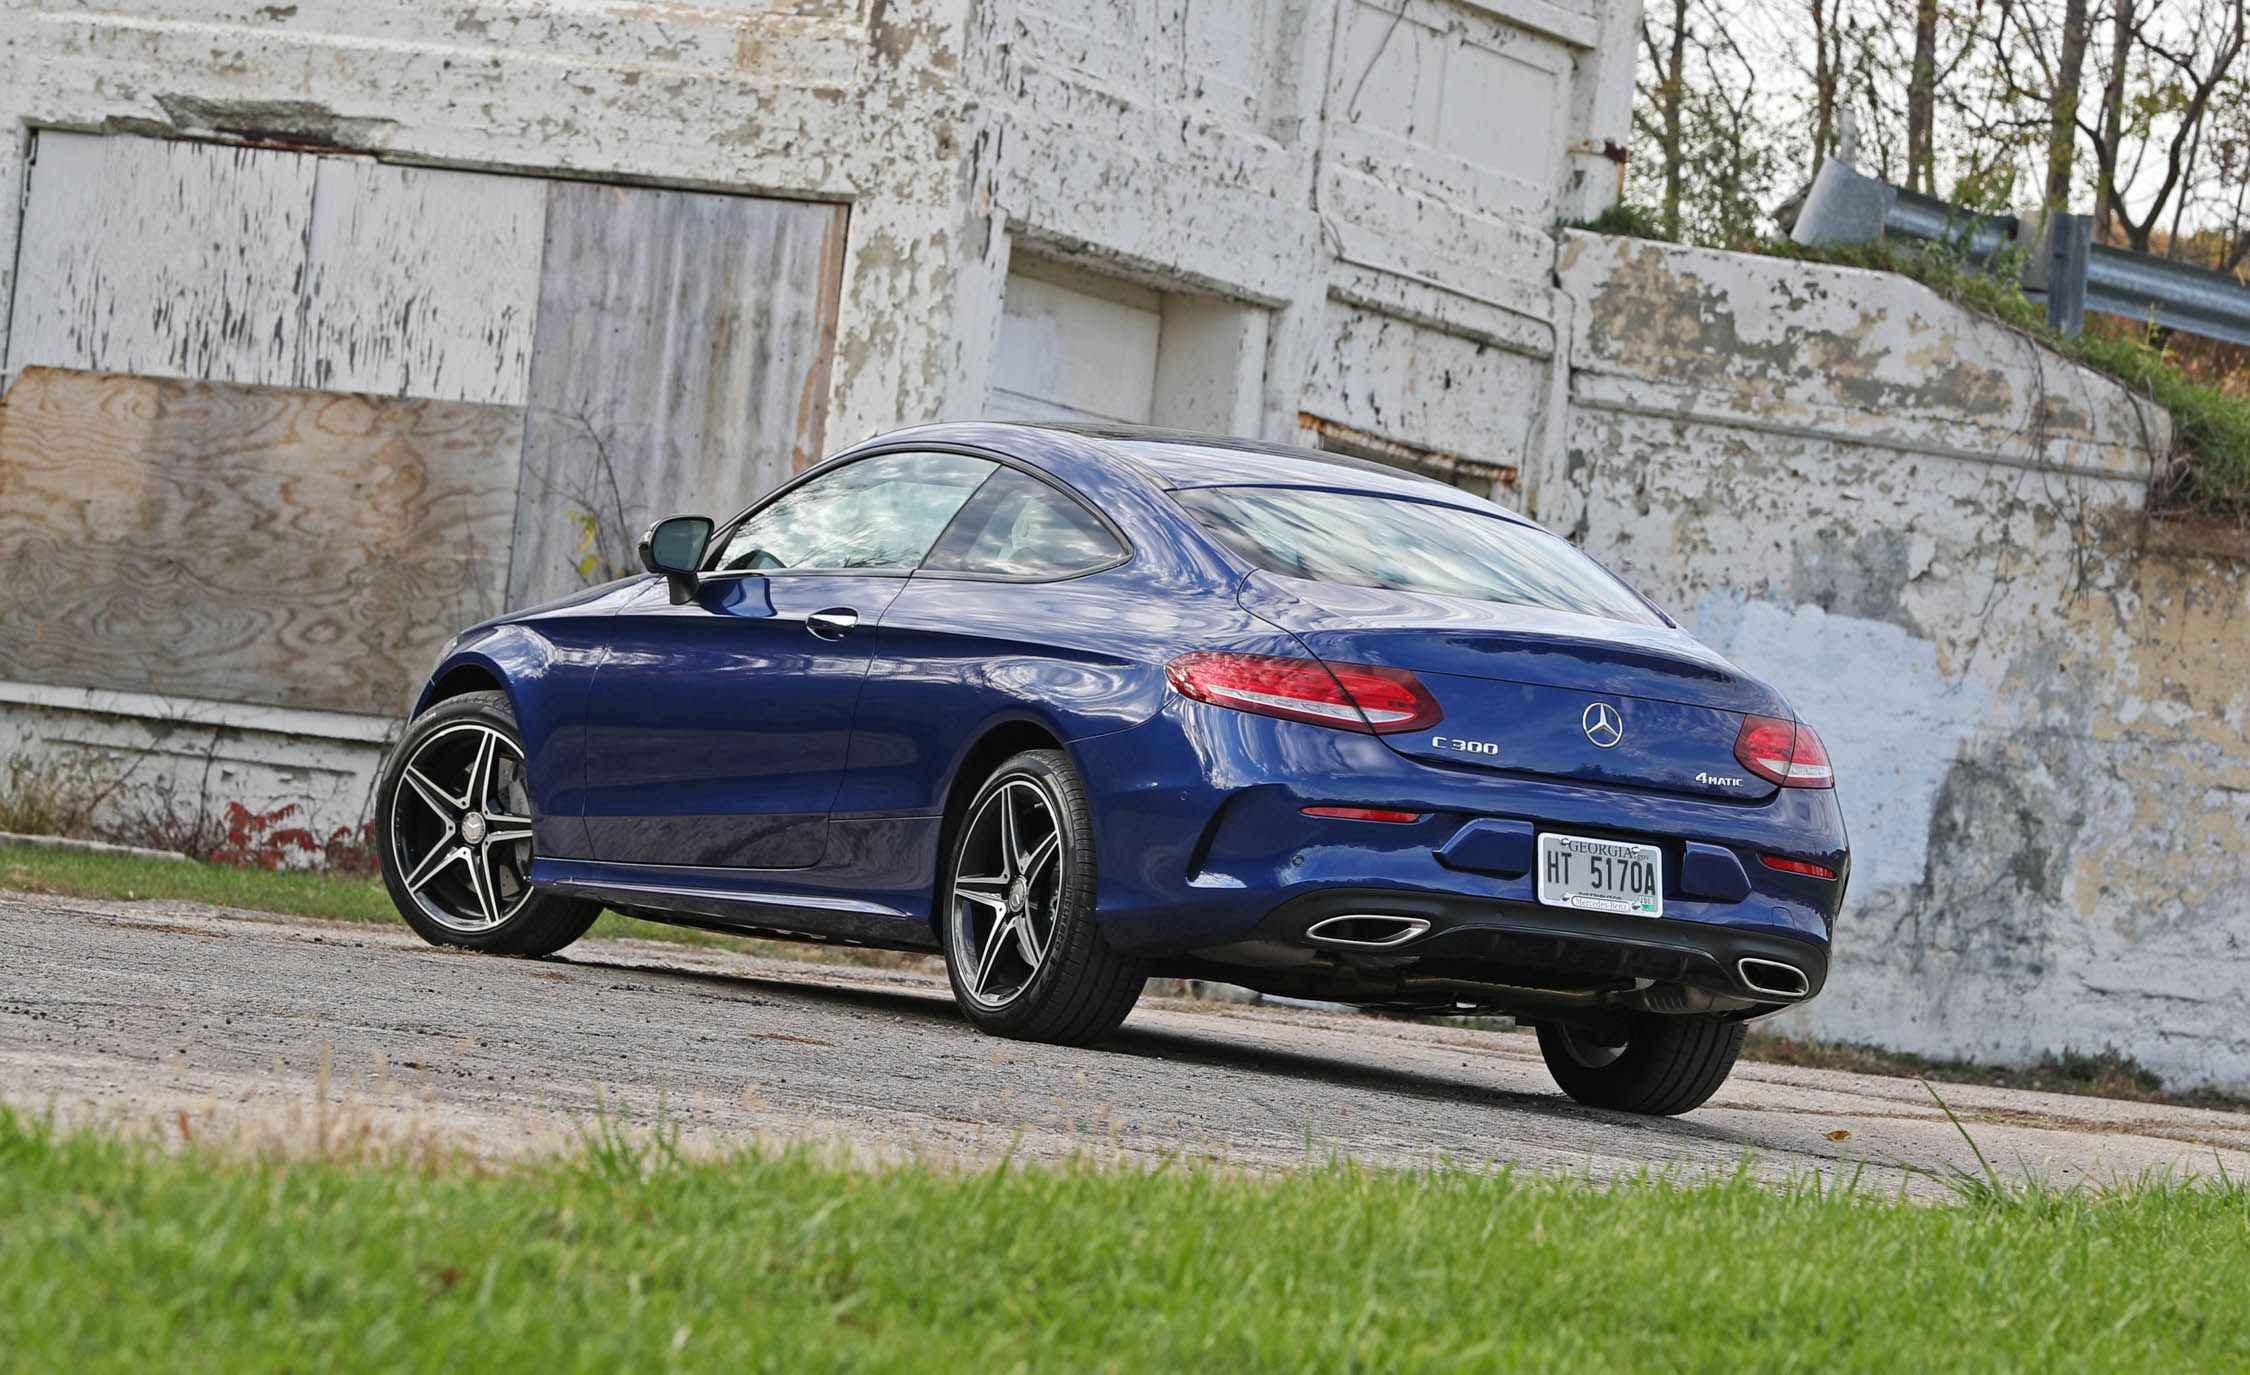 2017 Mercedes Benz C300 4MATIC Coupe Exterior Rear And Side (View 40 of 44)